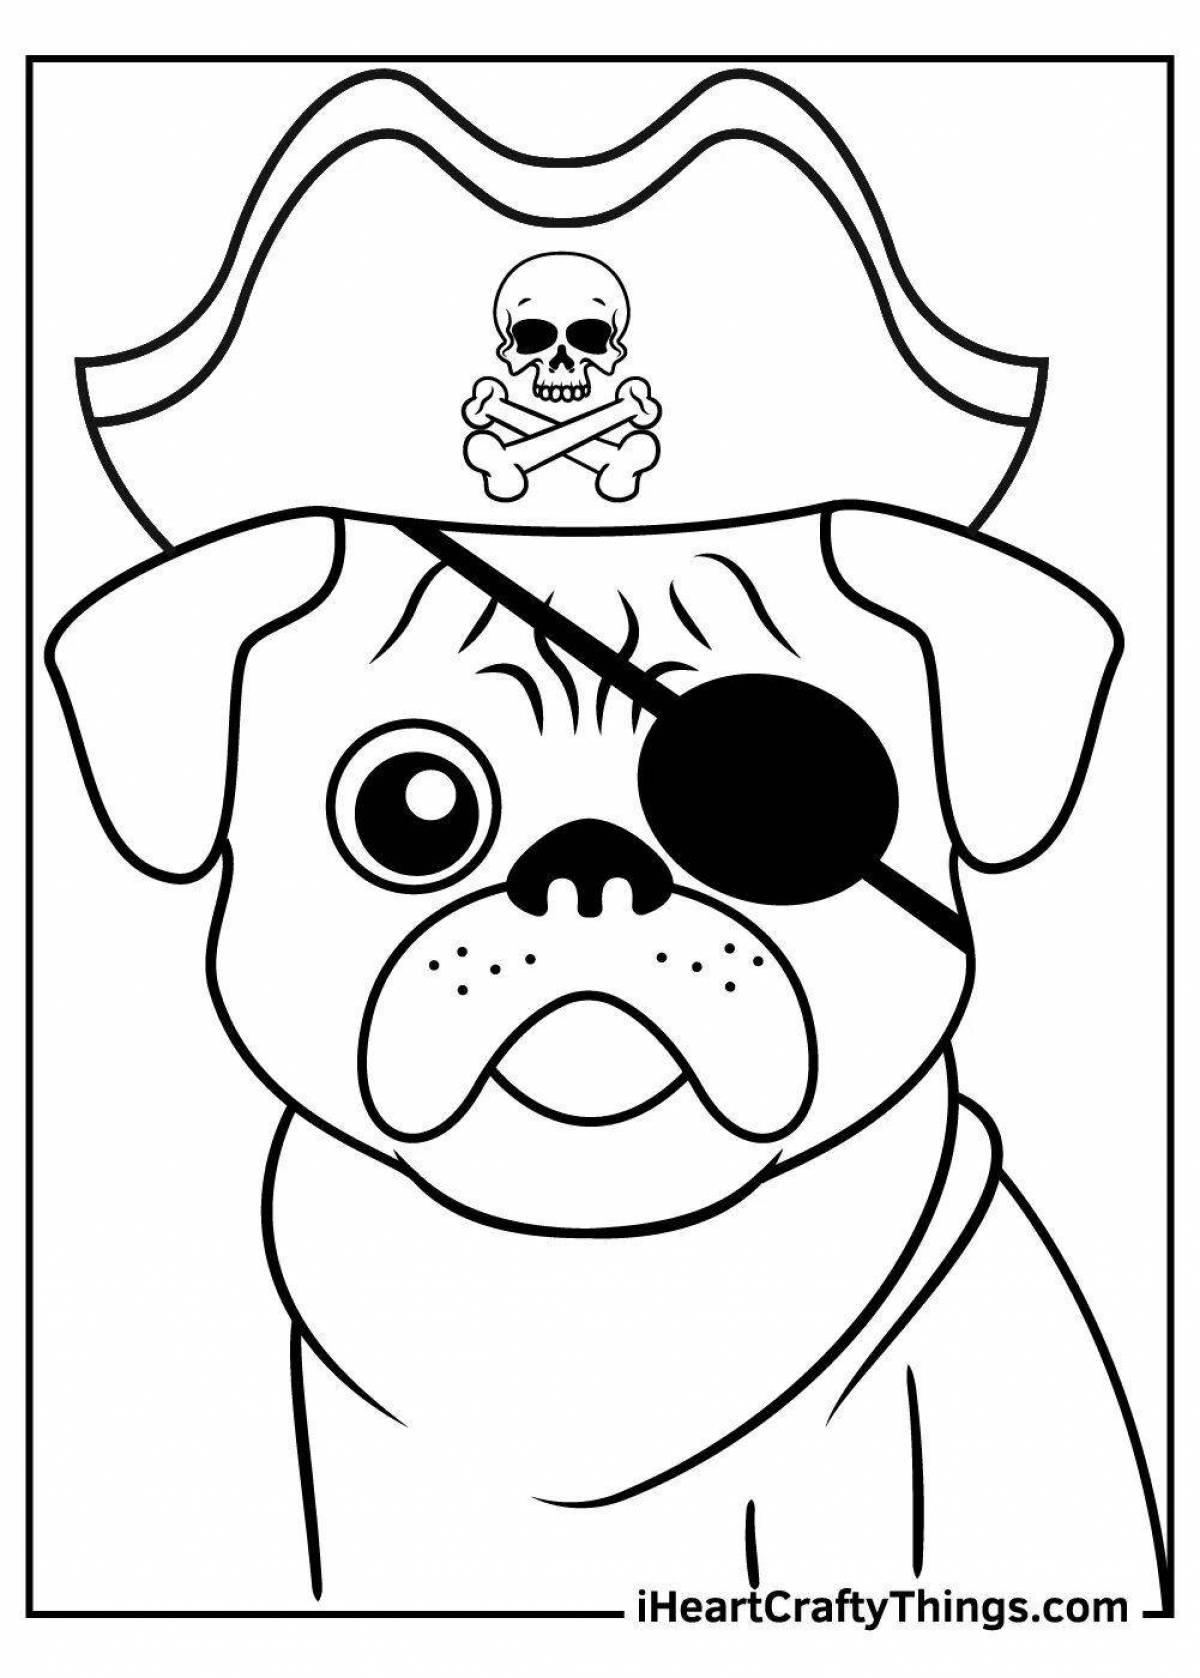 Colorful pj pug coloring page